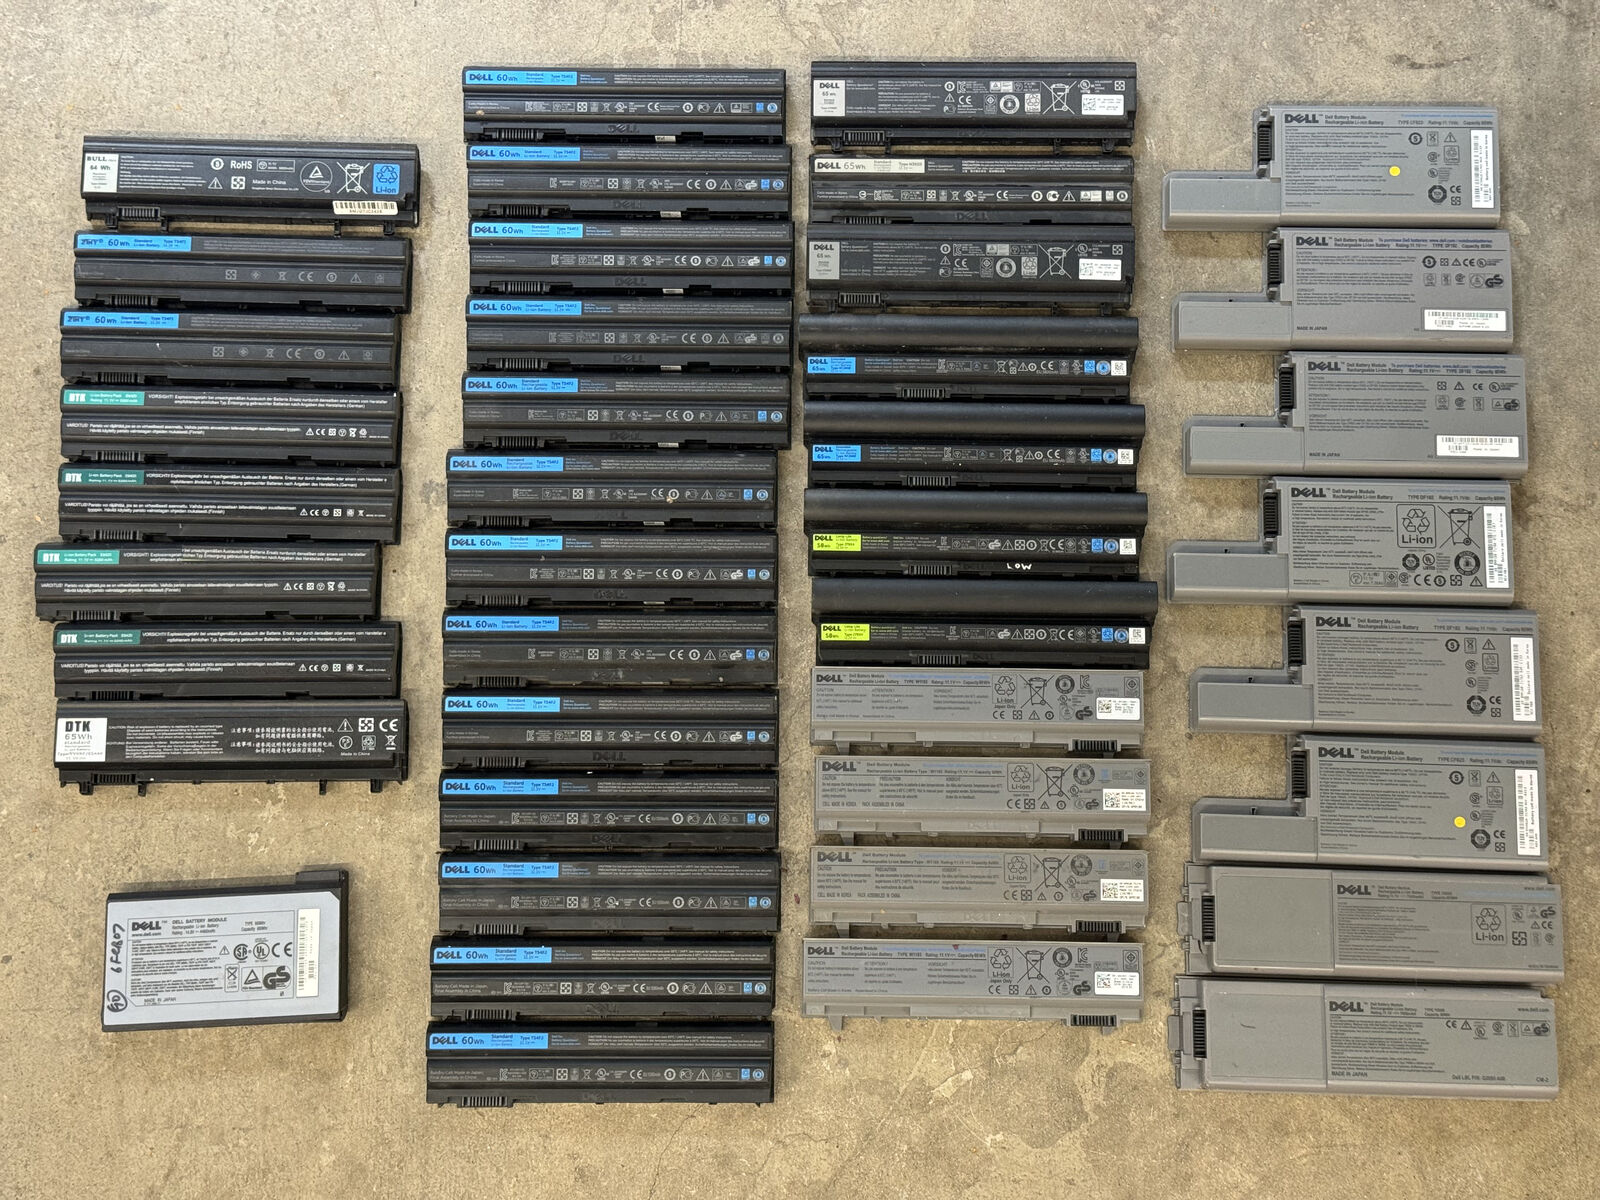 Lot of 41 Dell Laptop Batteries for Cell Harvesting Recovery Salvage